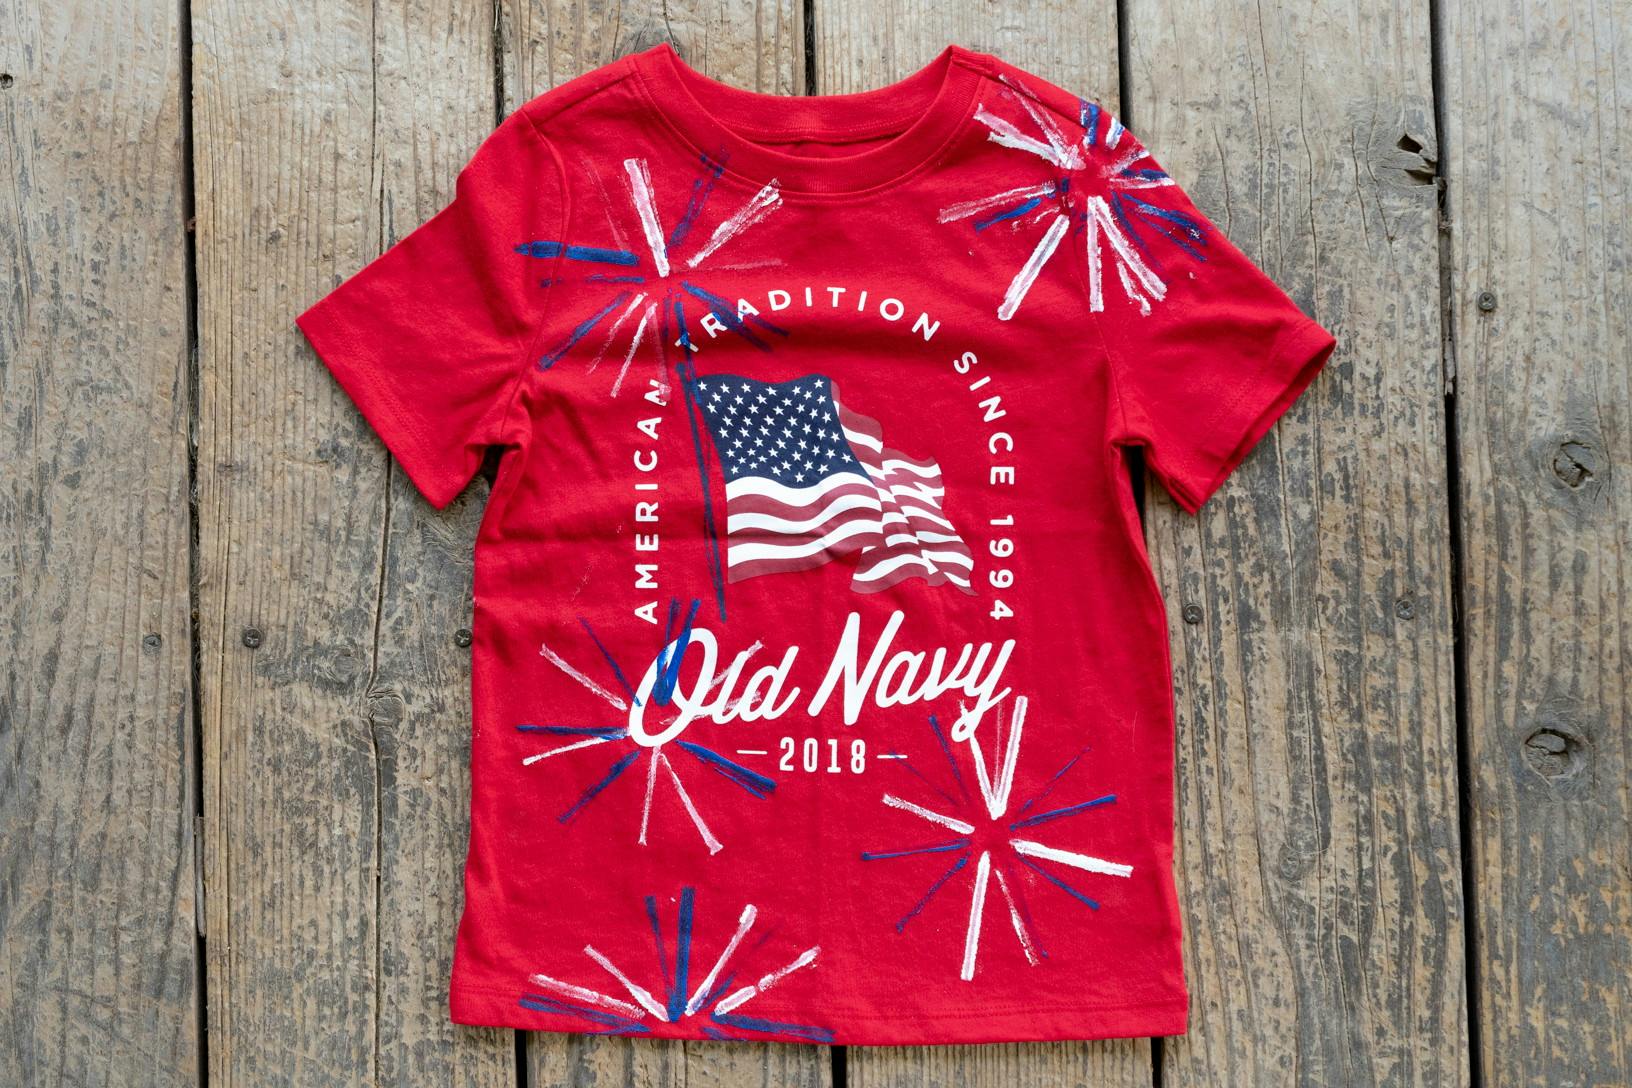 6 Ways to Bling Out Your $5 Old Navy Shirt for the 4th of July